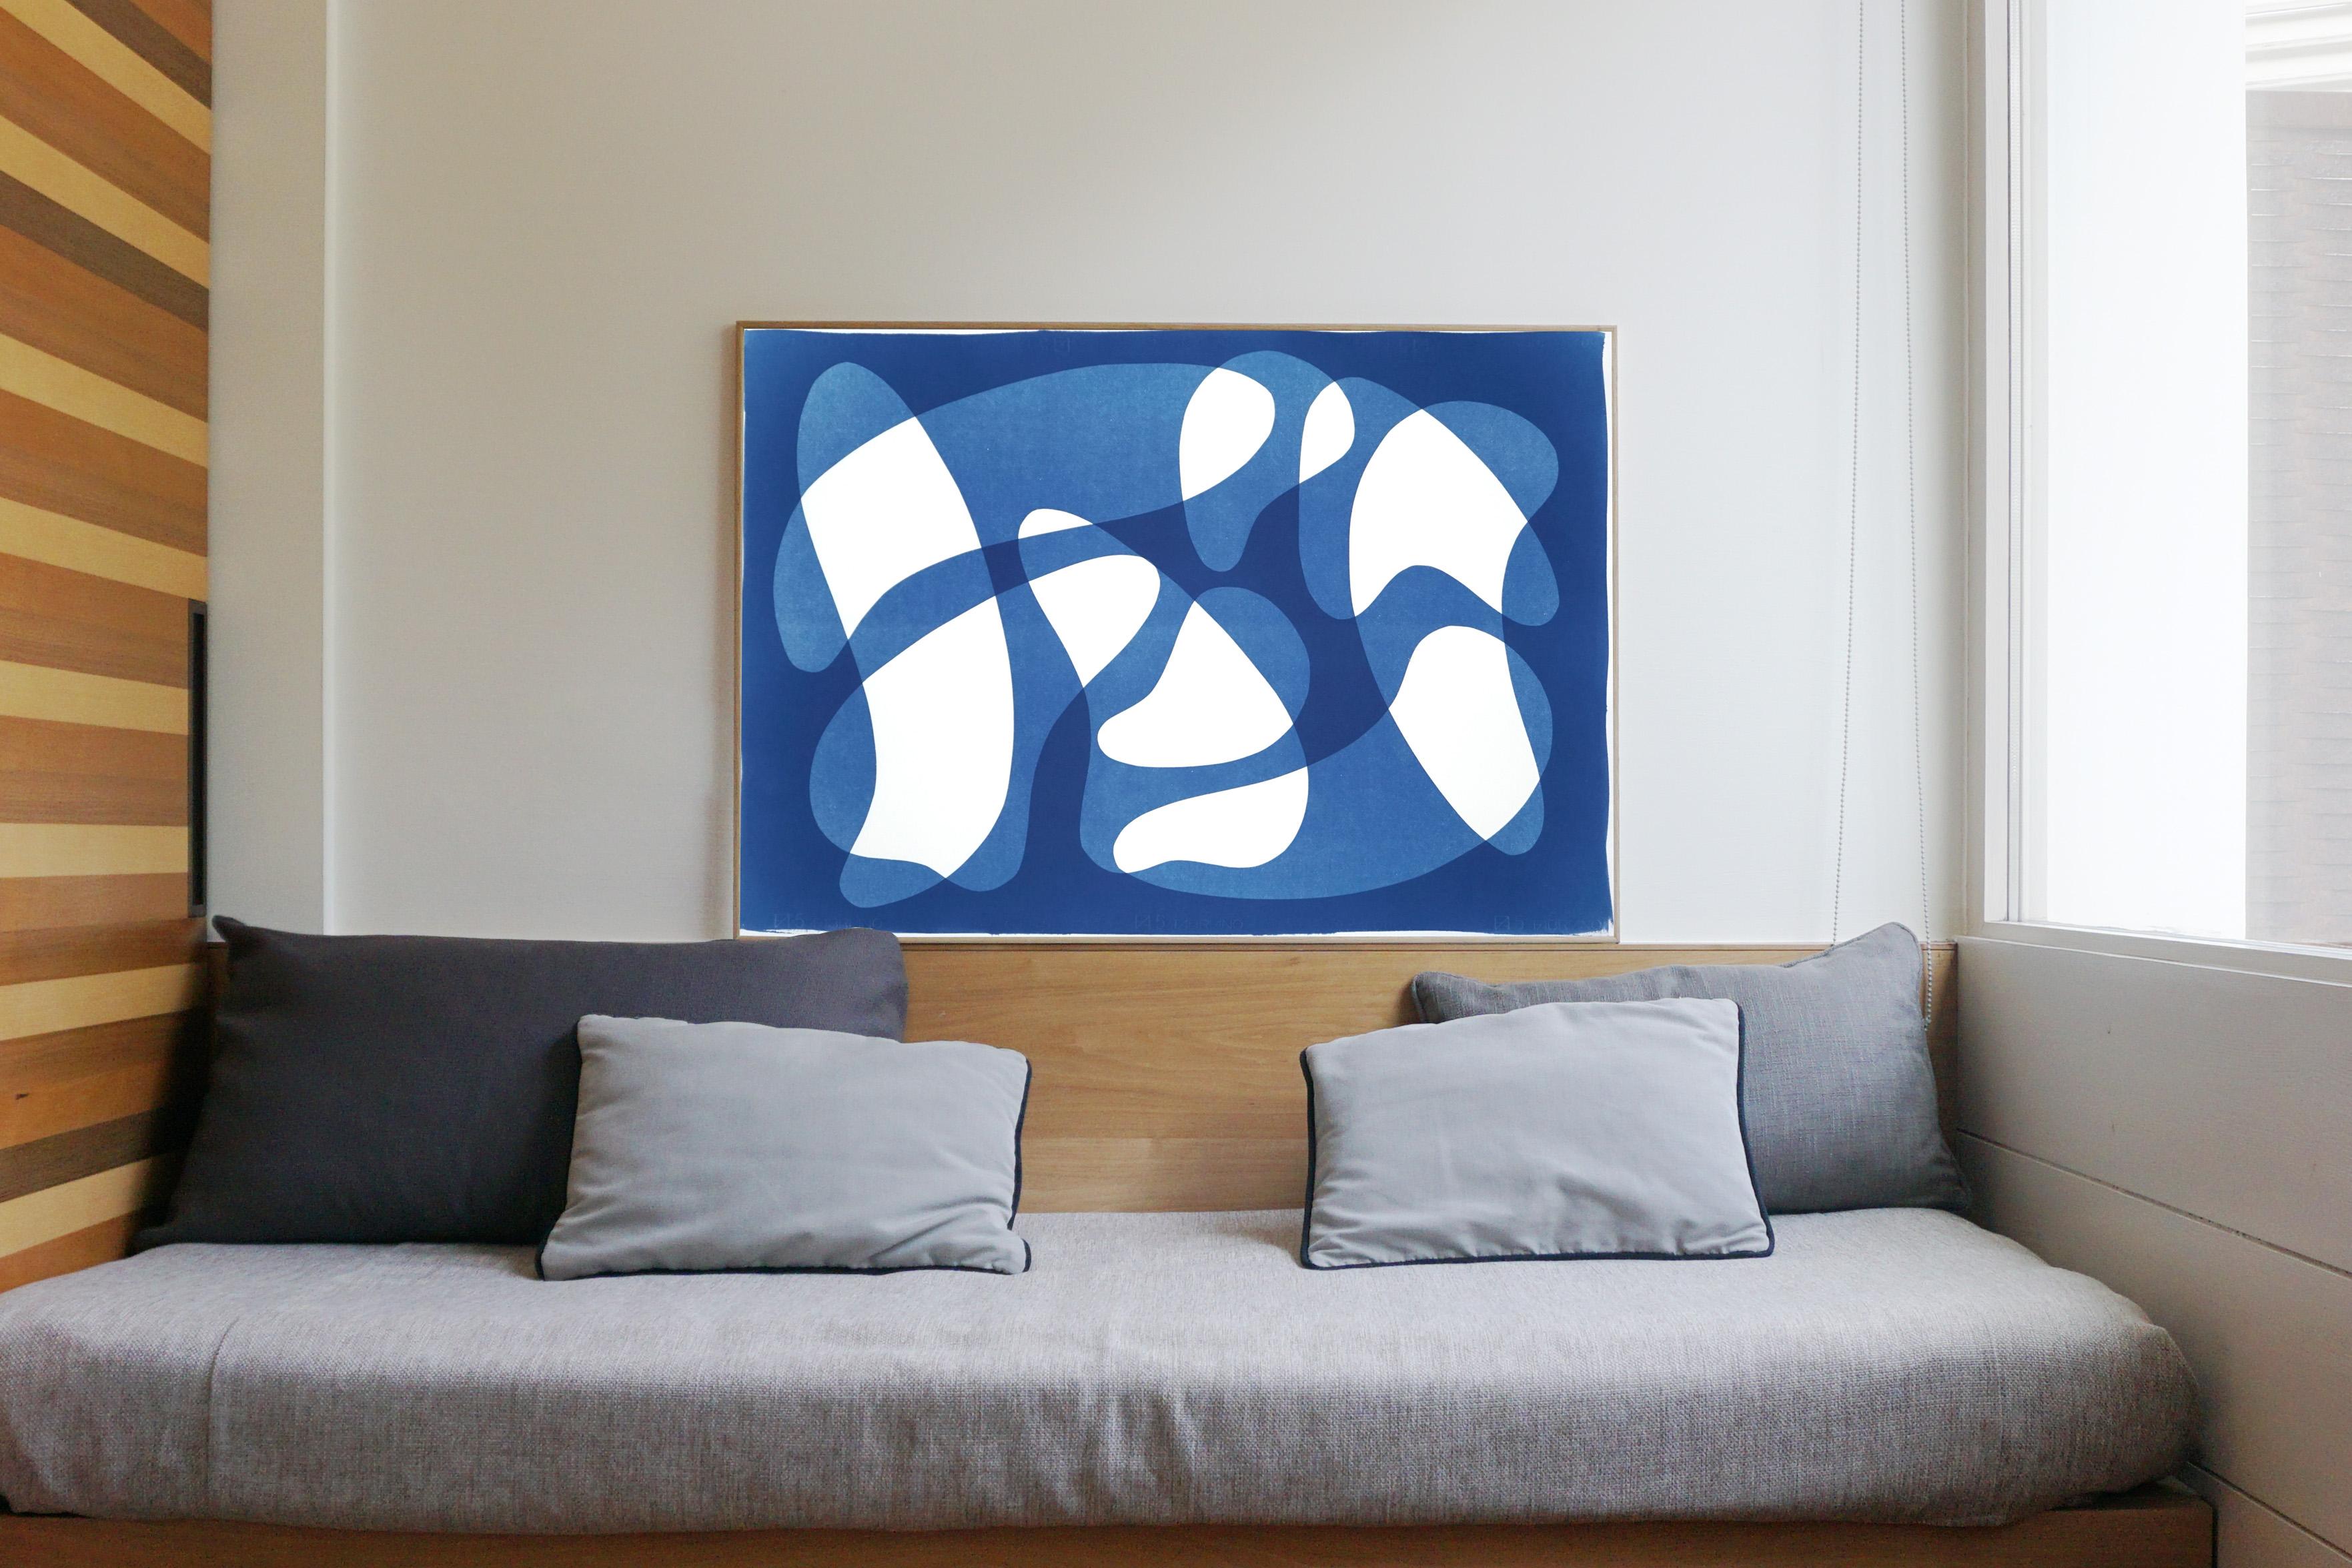 This is an exclusive handprinted unique cyanotype that takes its inspiration from the mid-century modern shapes.
It's made by layering paper cutouts and different exposures using uv-light. 

Details:
+ Title: Vanguard Shapes and Shadows I 
+ Year: